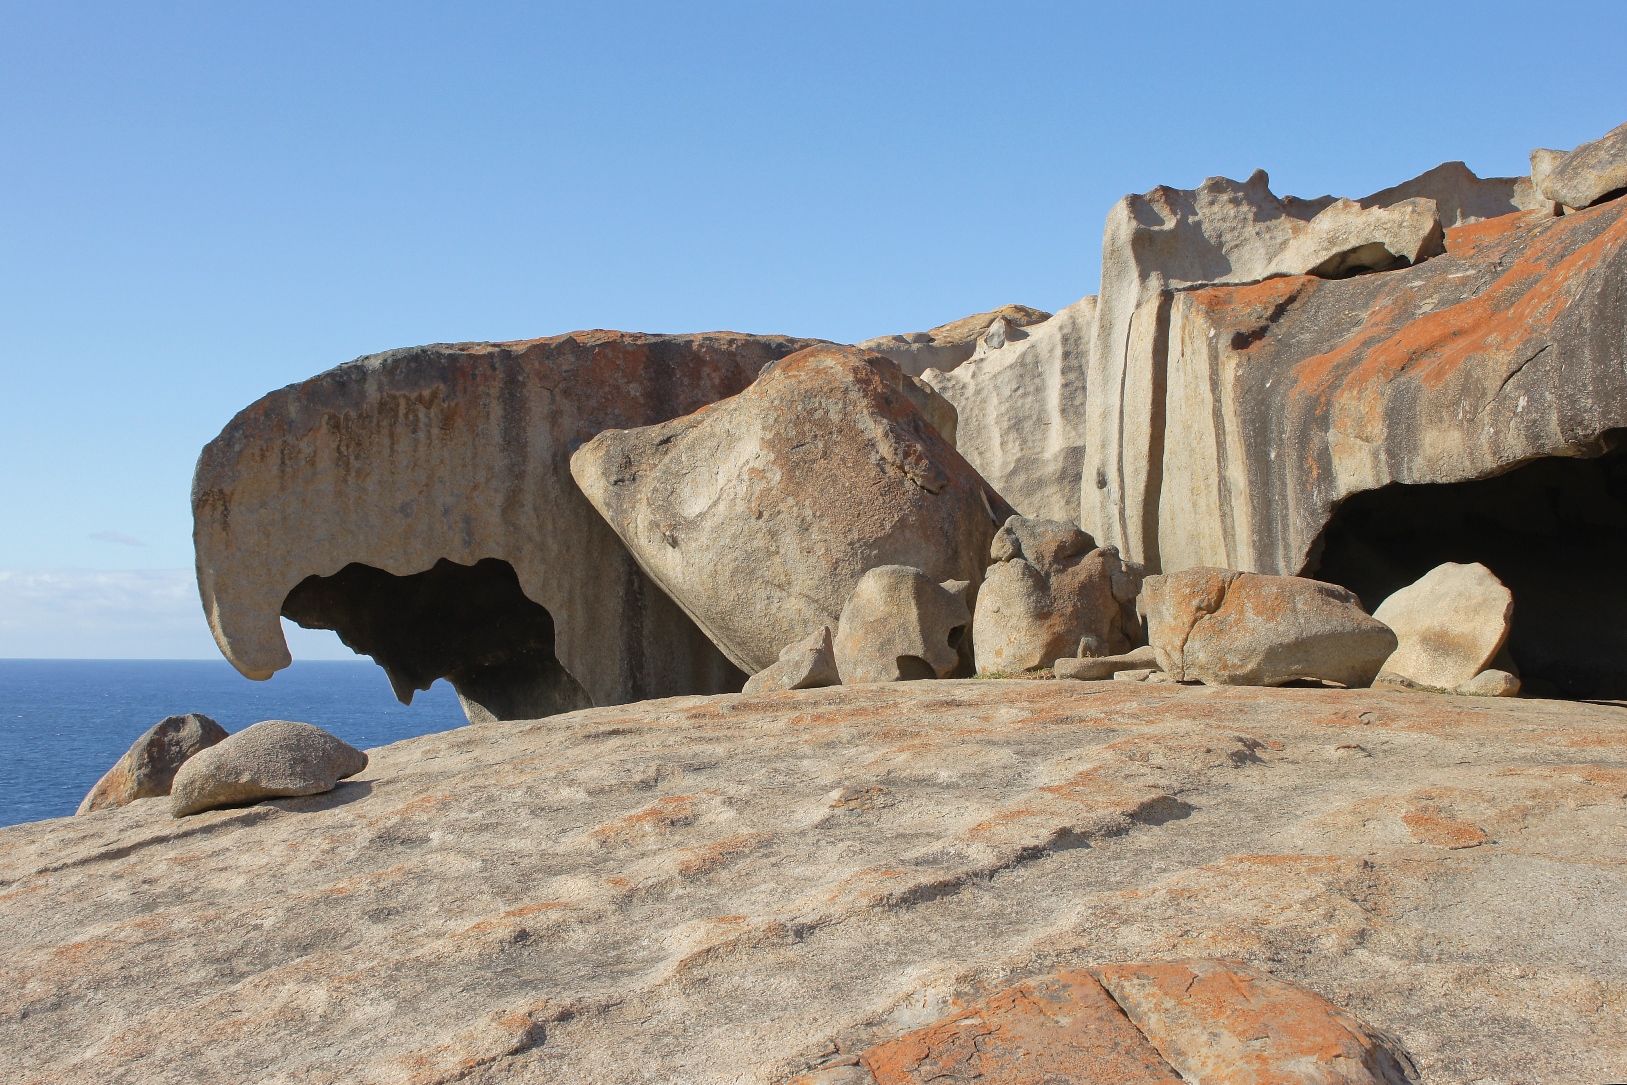 The Remarkable Rocks in Flinders Chase